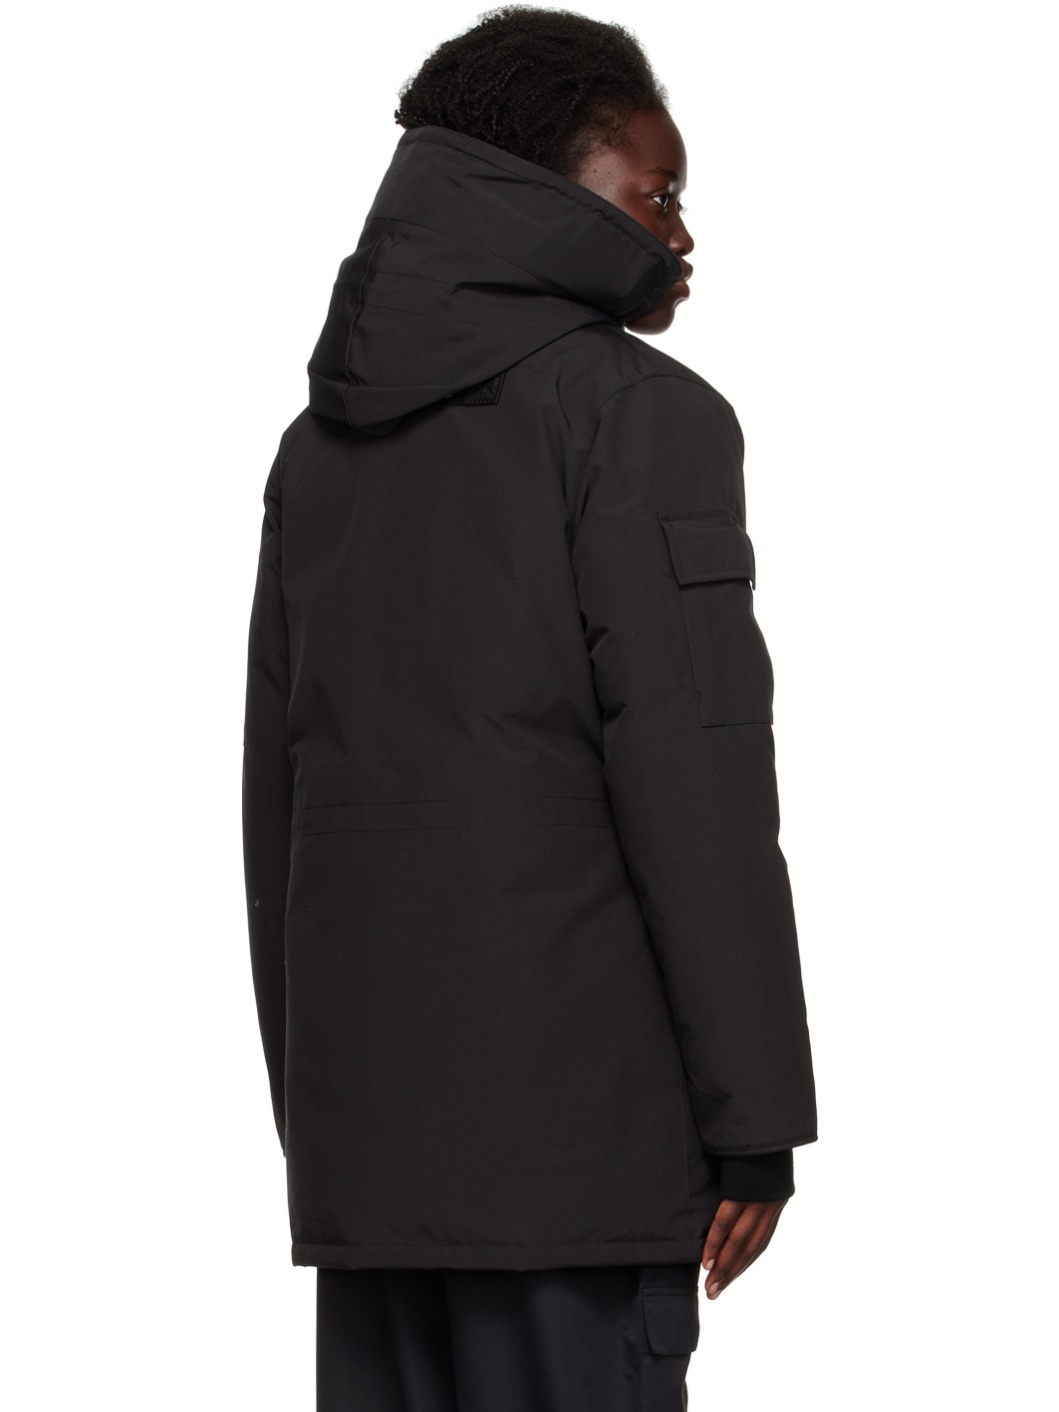 Black Expedition Down Jacket - 3